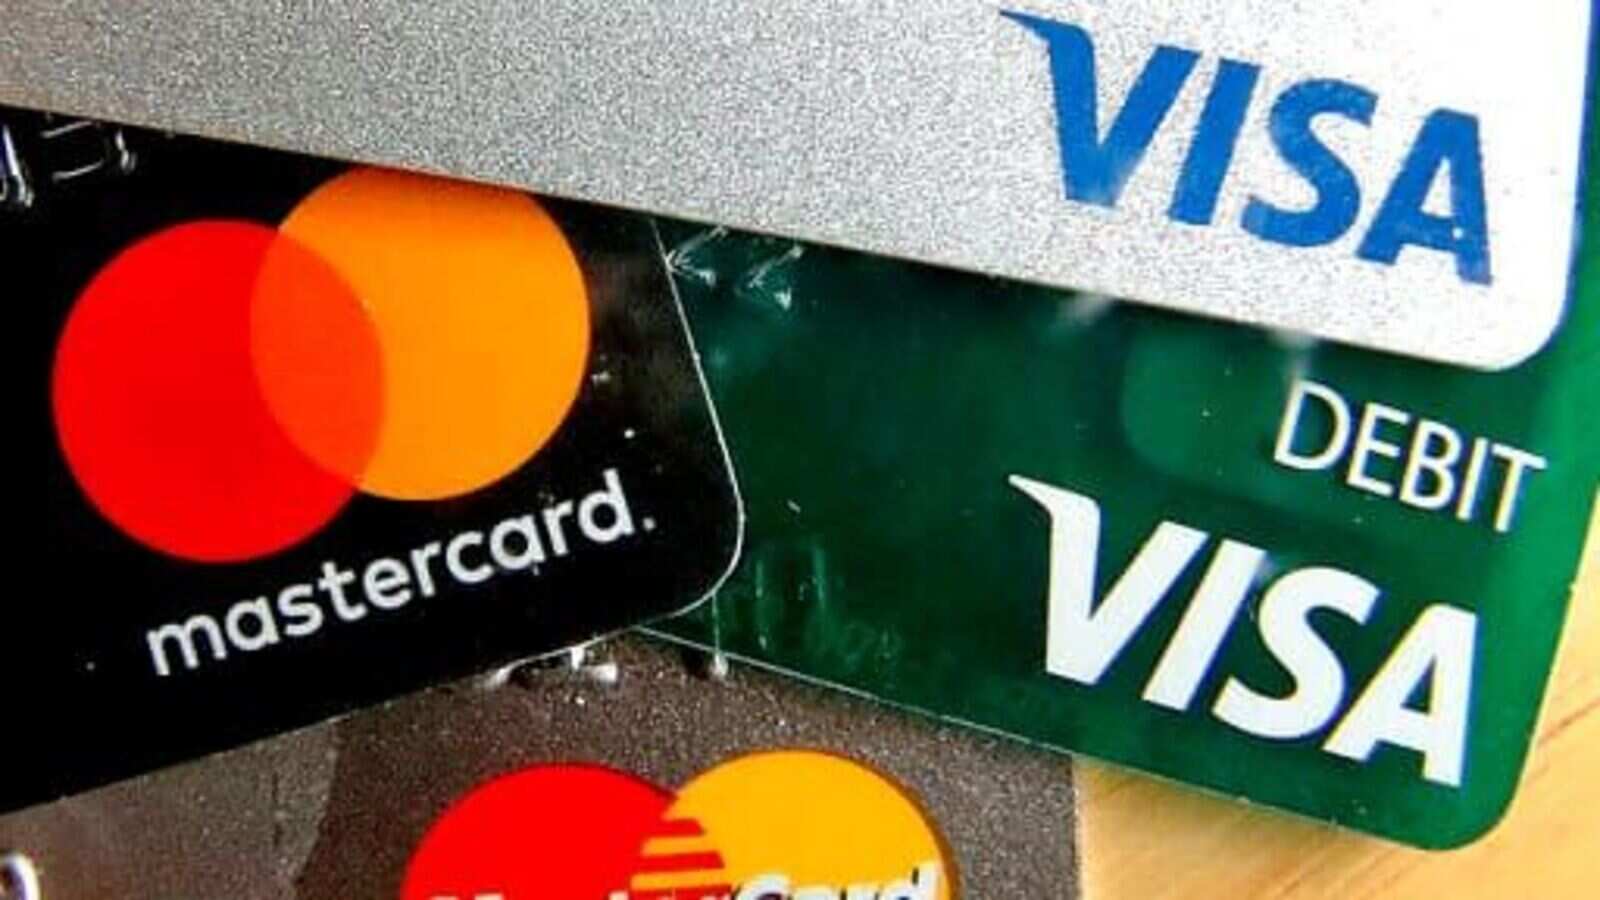 How to choose the right credit card for your lifestyle